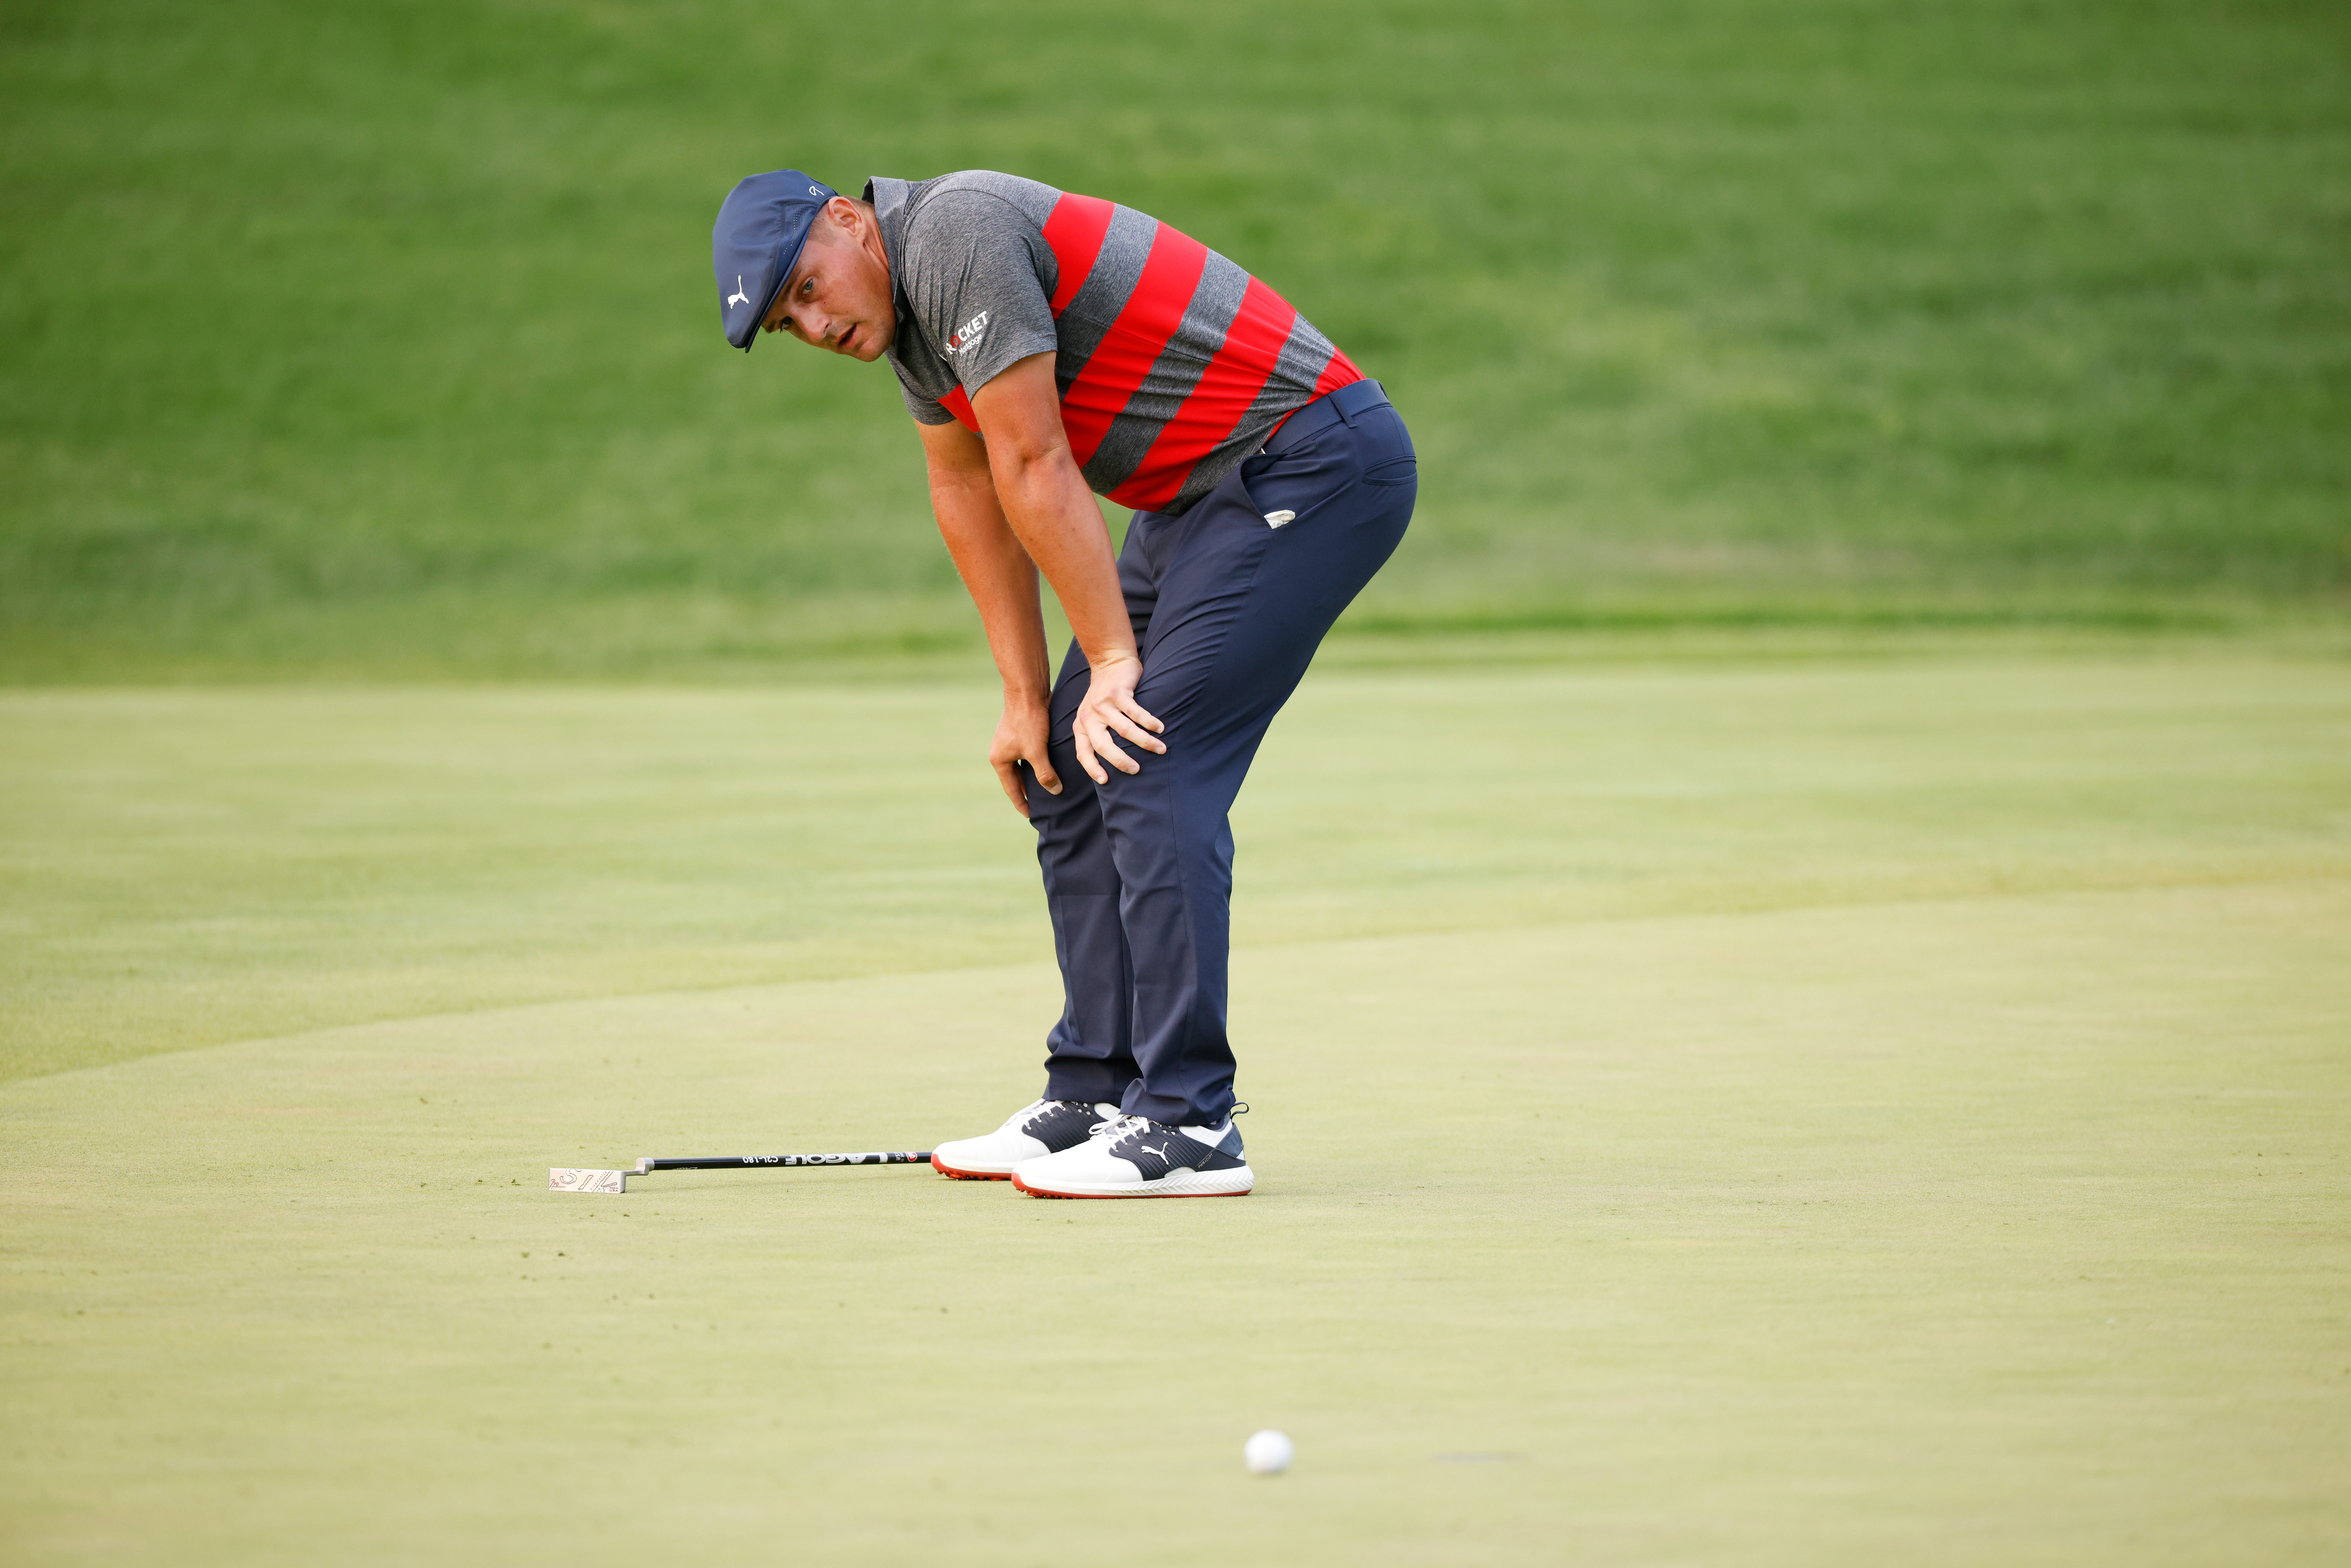 Bryson DeChambeau reacts after missing a putt at the BMW Championship